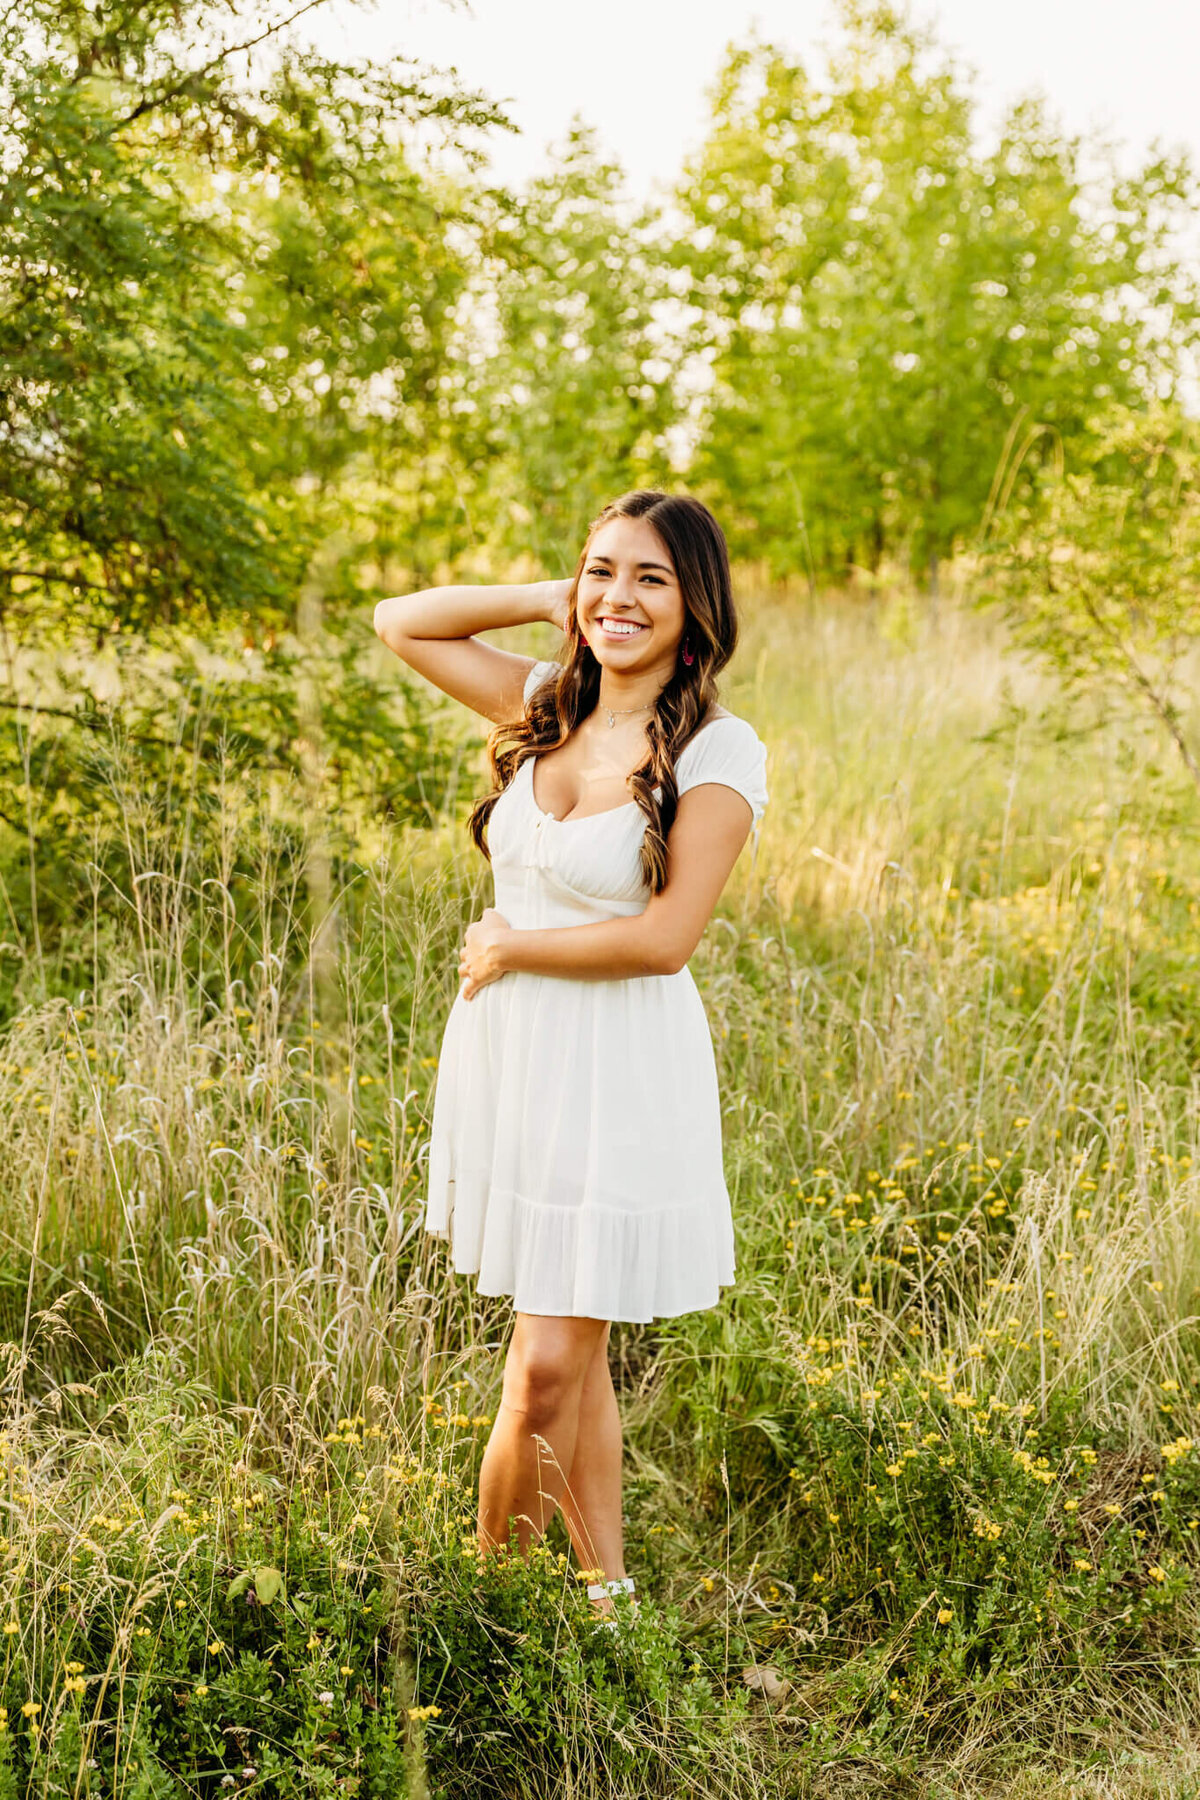 gorgeous teen girl in a white dress with ankles crossed smiling from ear to ear as she enjoys her senior photo session